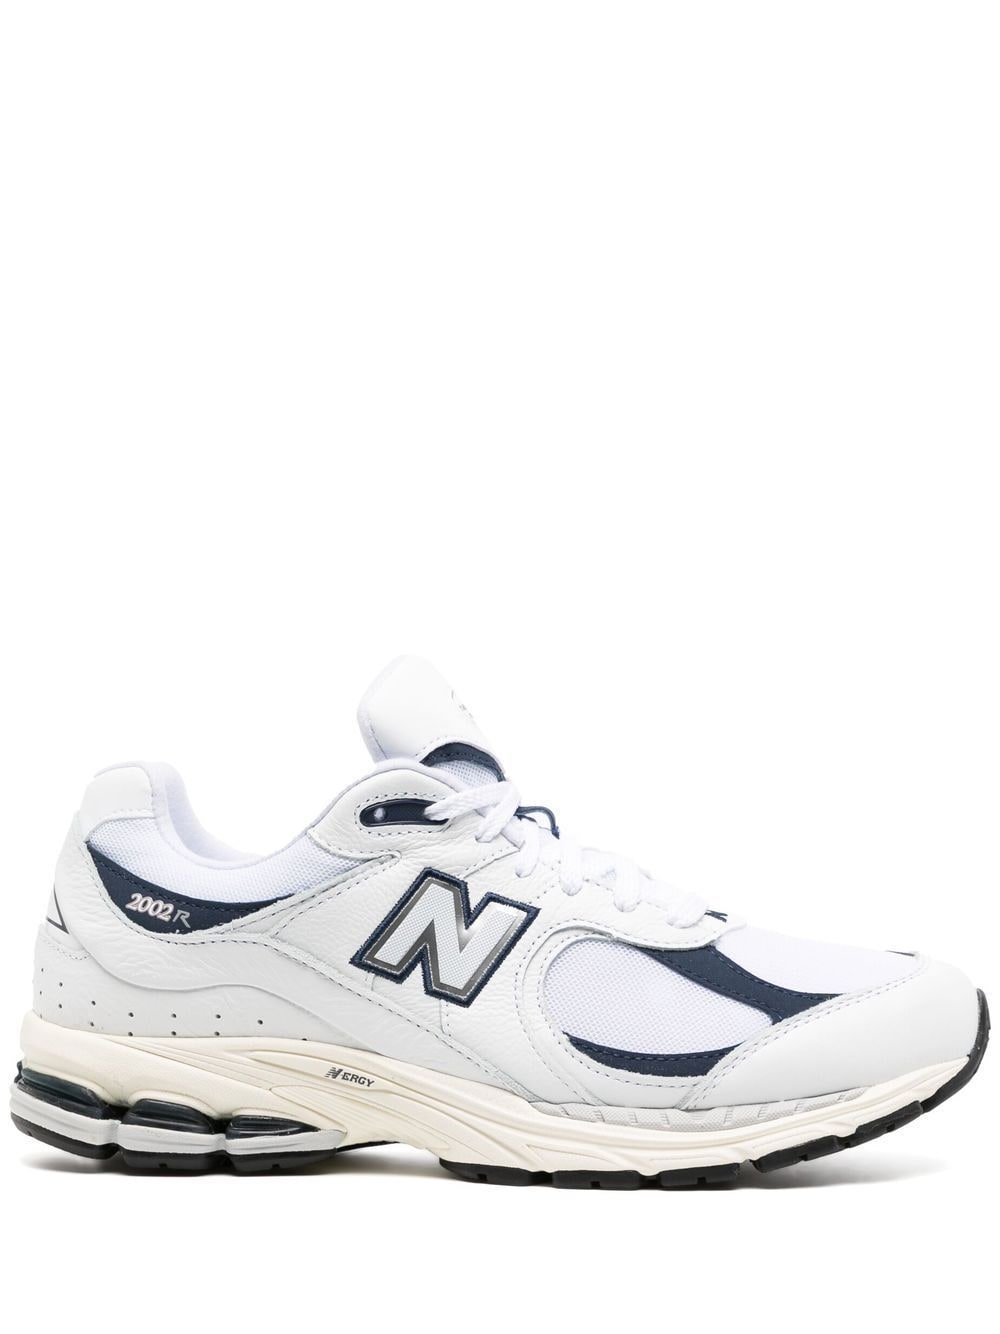 New Balance 2002R Protection Pack sneakers - White